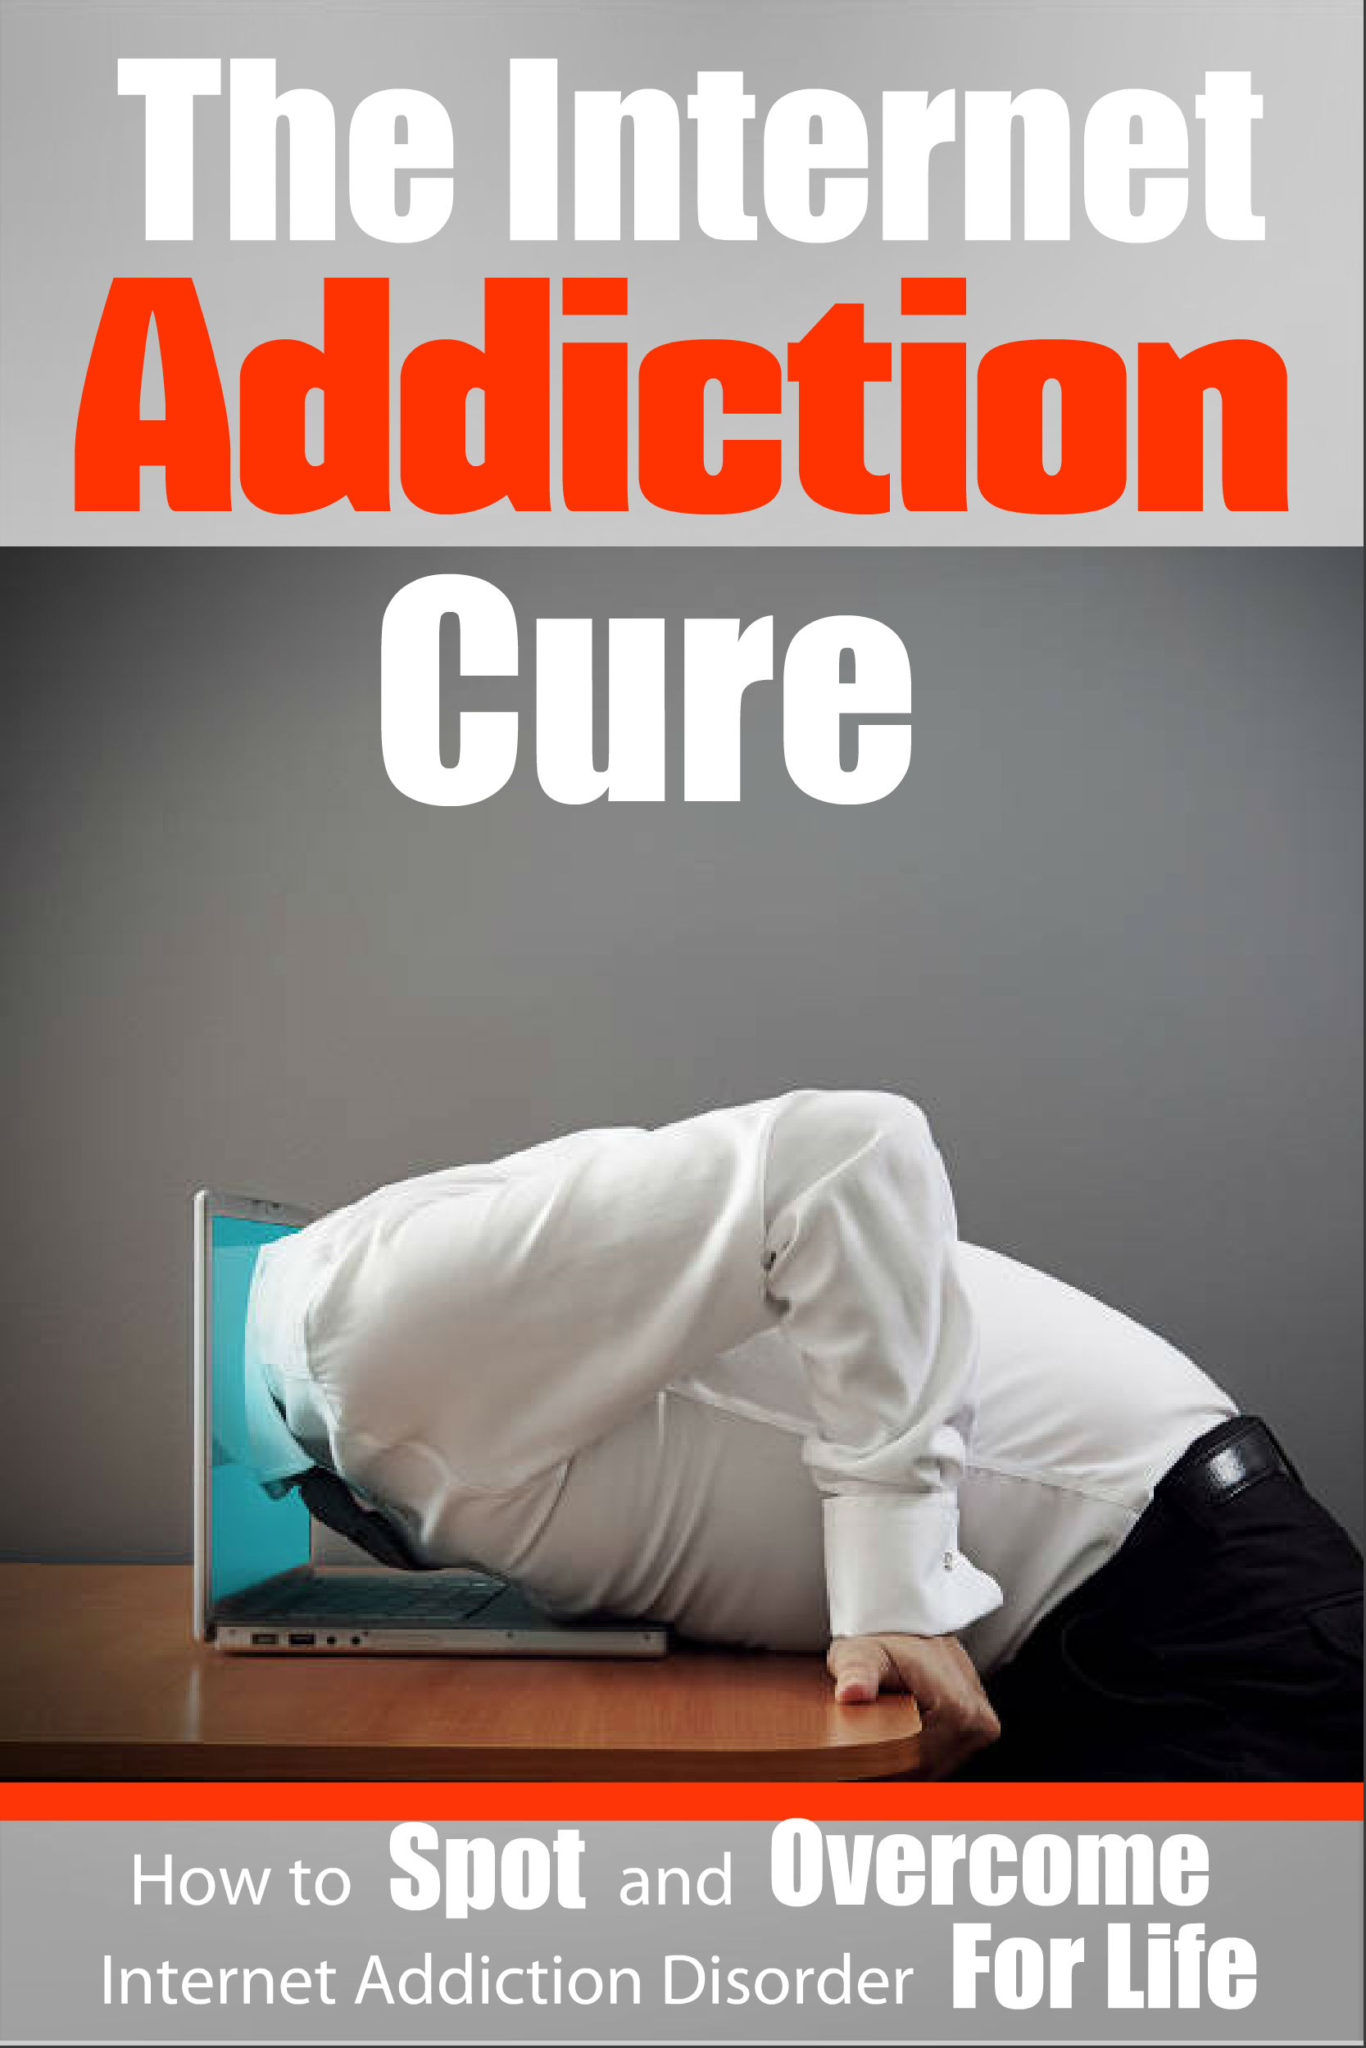 The Internet Addiction Cure – How To Spot And Overcome Internet Addiction Disorder For Life by Joanne Collins